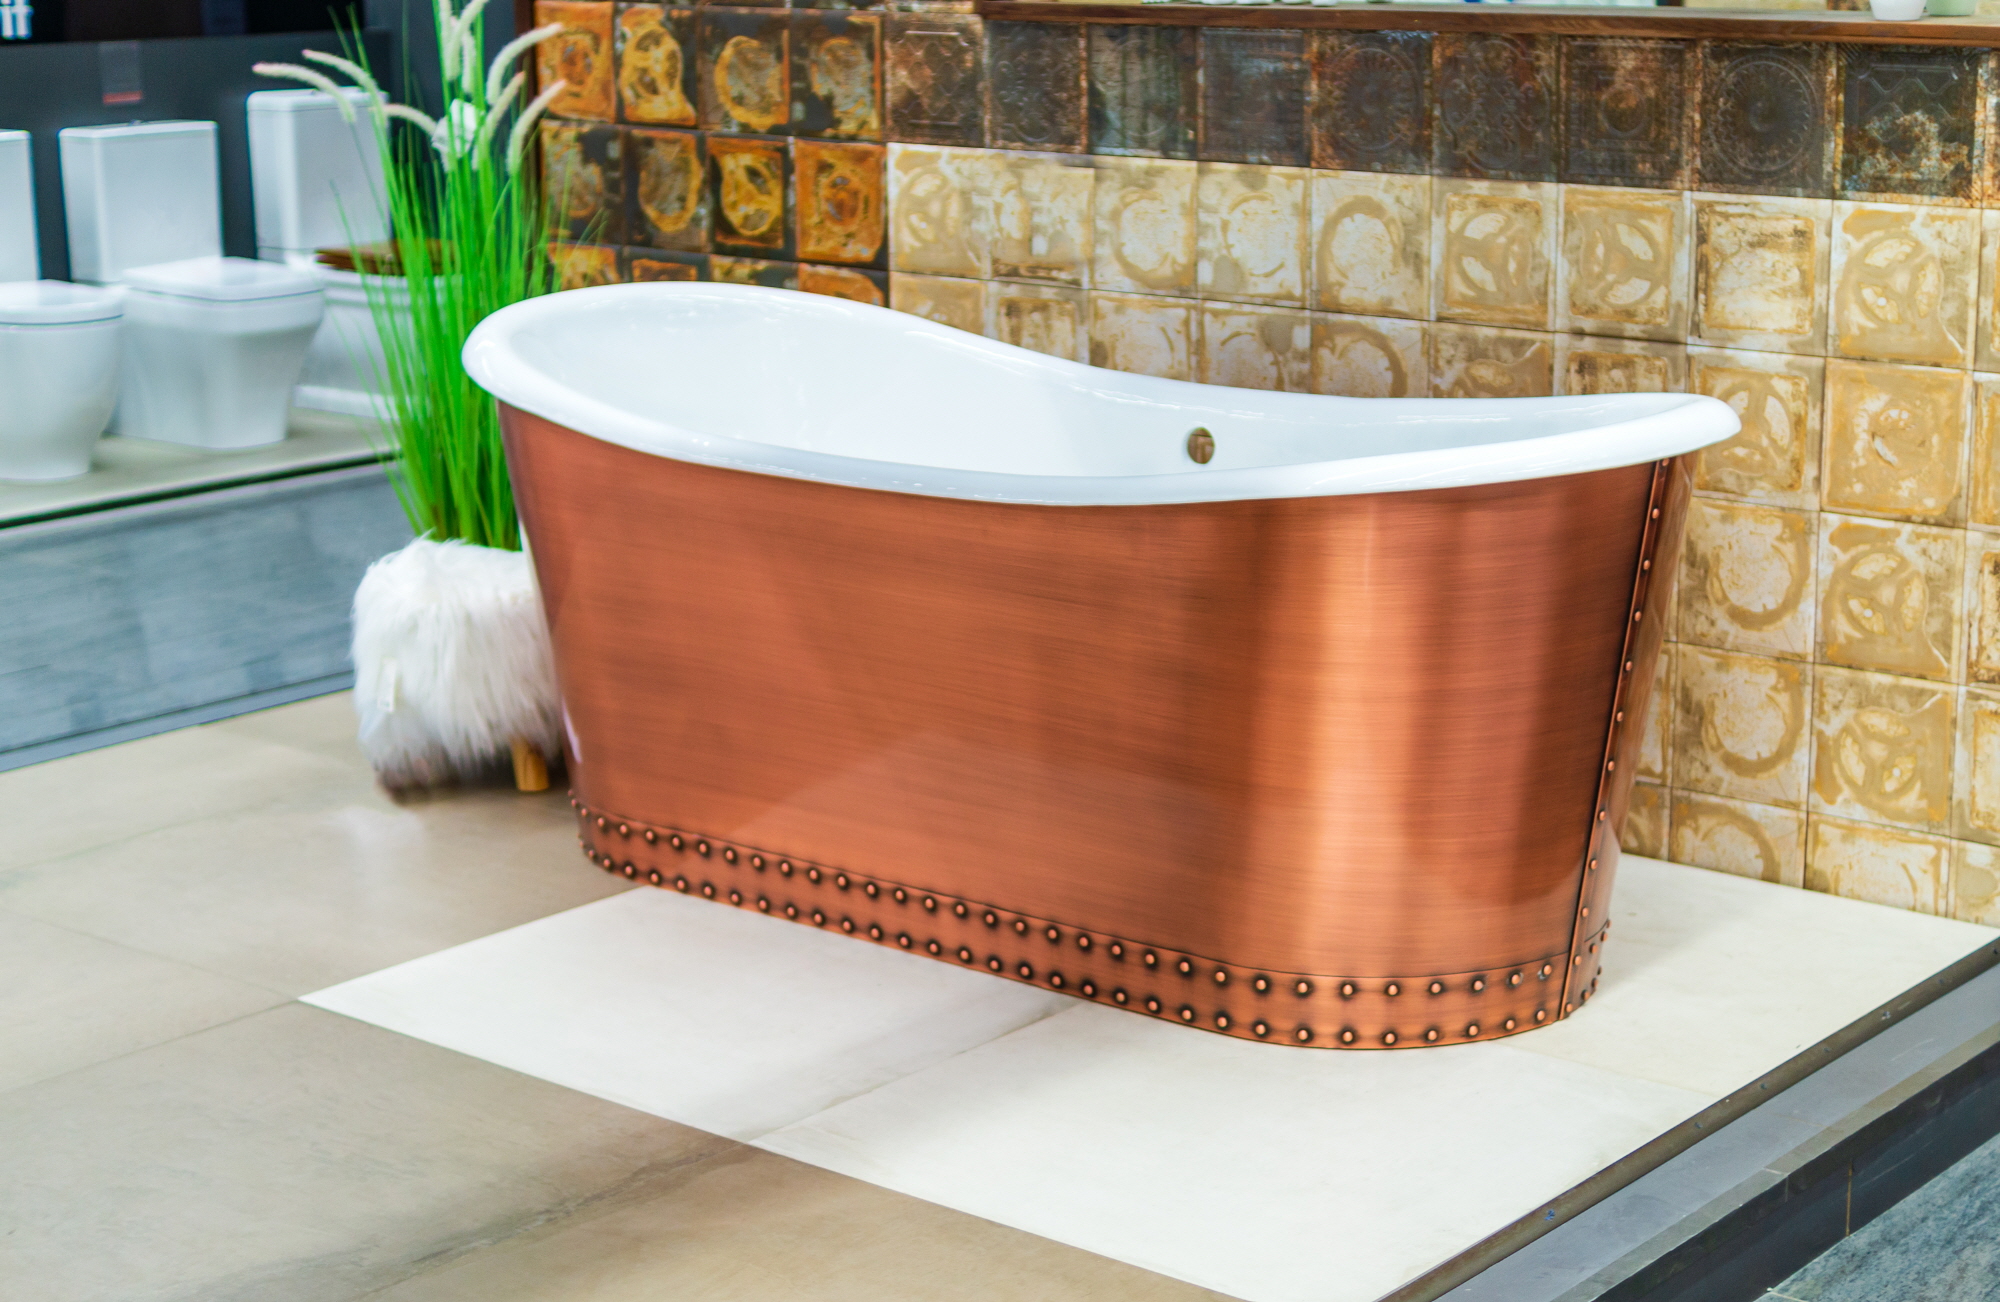 Indulge in luxury with a stunning freestanding copper bathtub, paired with metallic fixtures for a lavish touch.